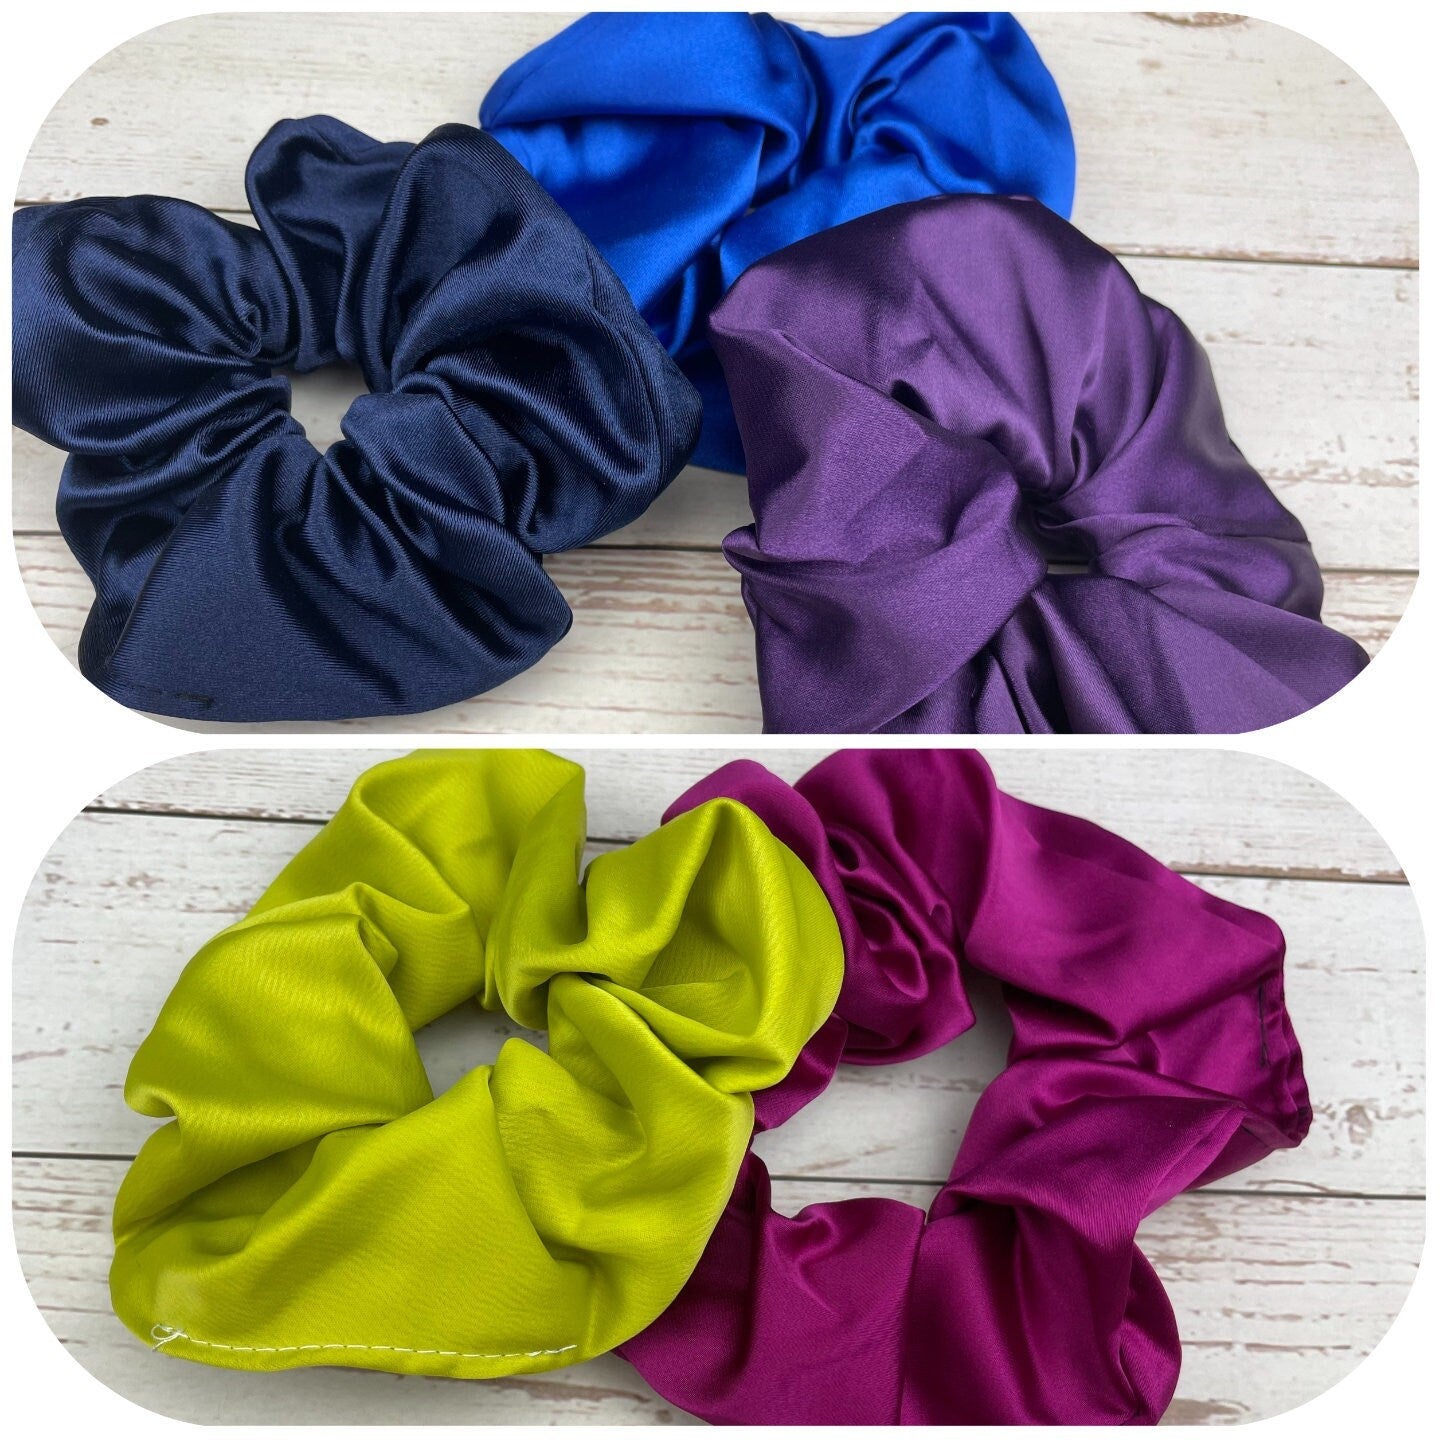 Elevate your hair game with these handmade satin scrunchies with bows! Available in vibrant colors like Parliament blue, purple, dark blue, green, and fuchsia, these scrunchies will add a pop of color to any hairstyle.